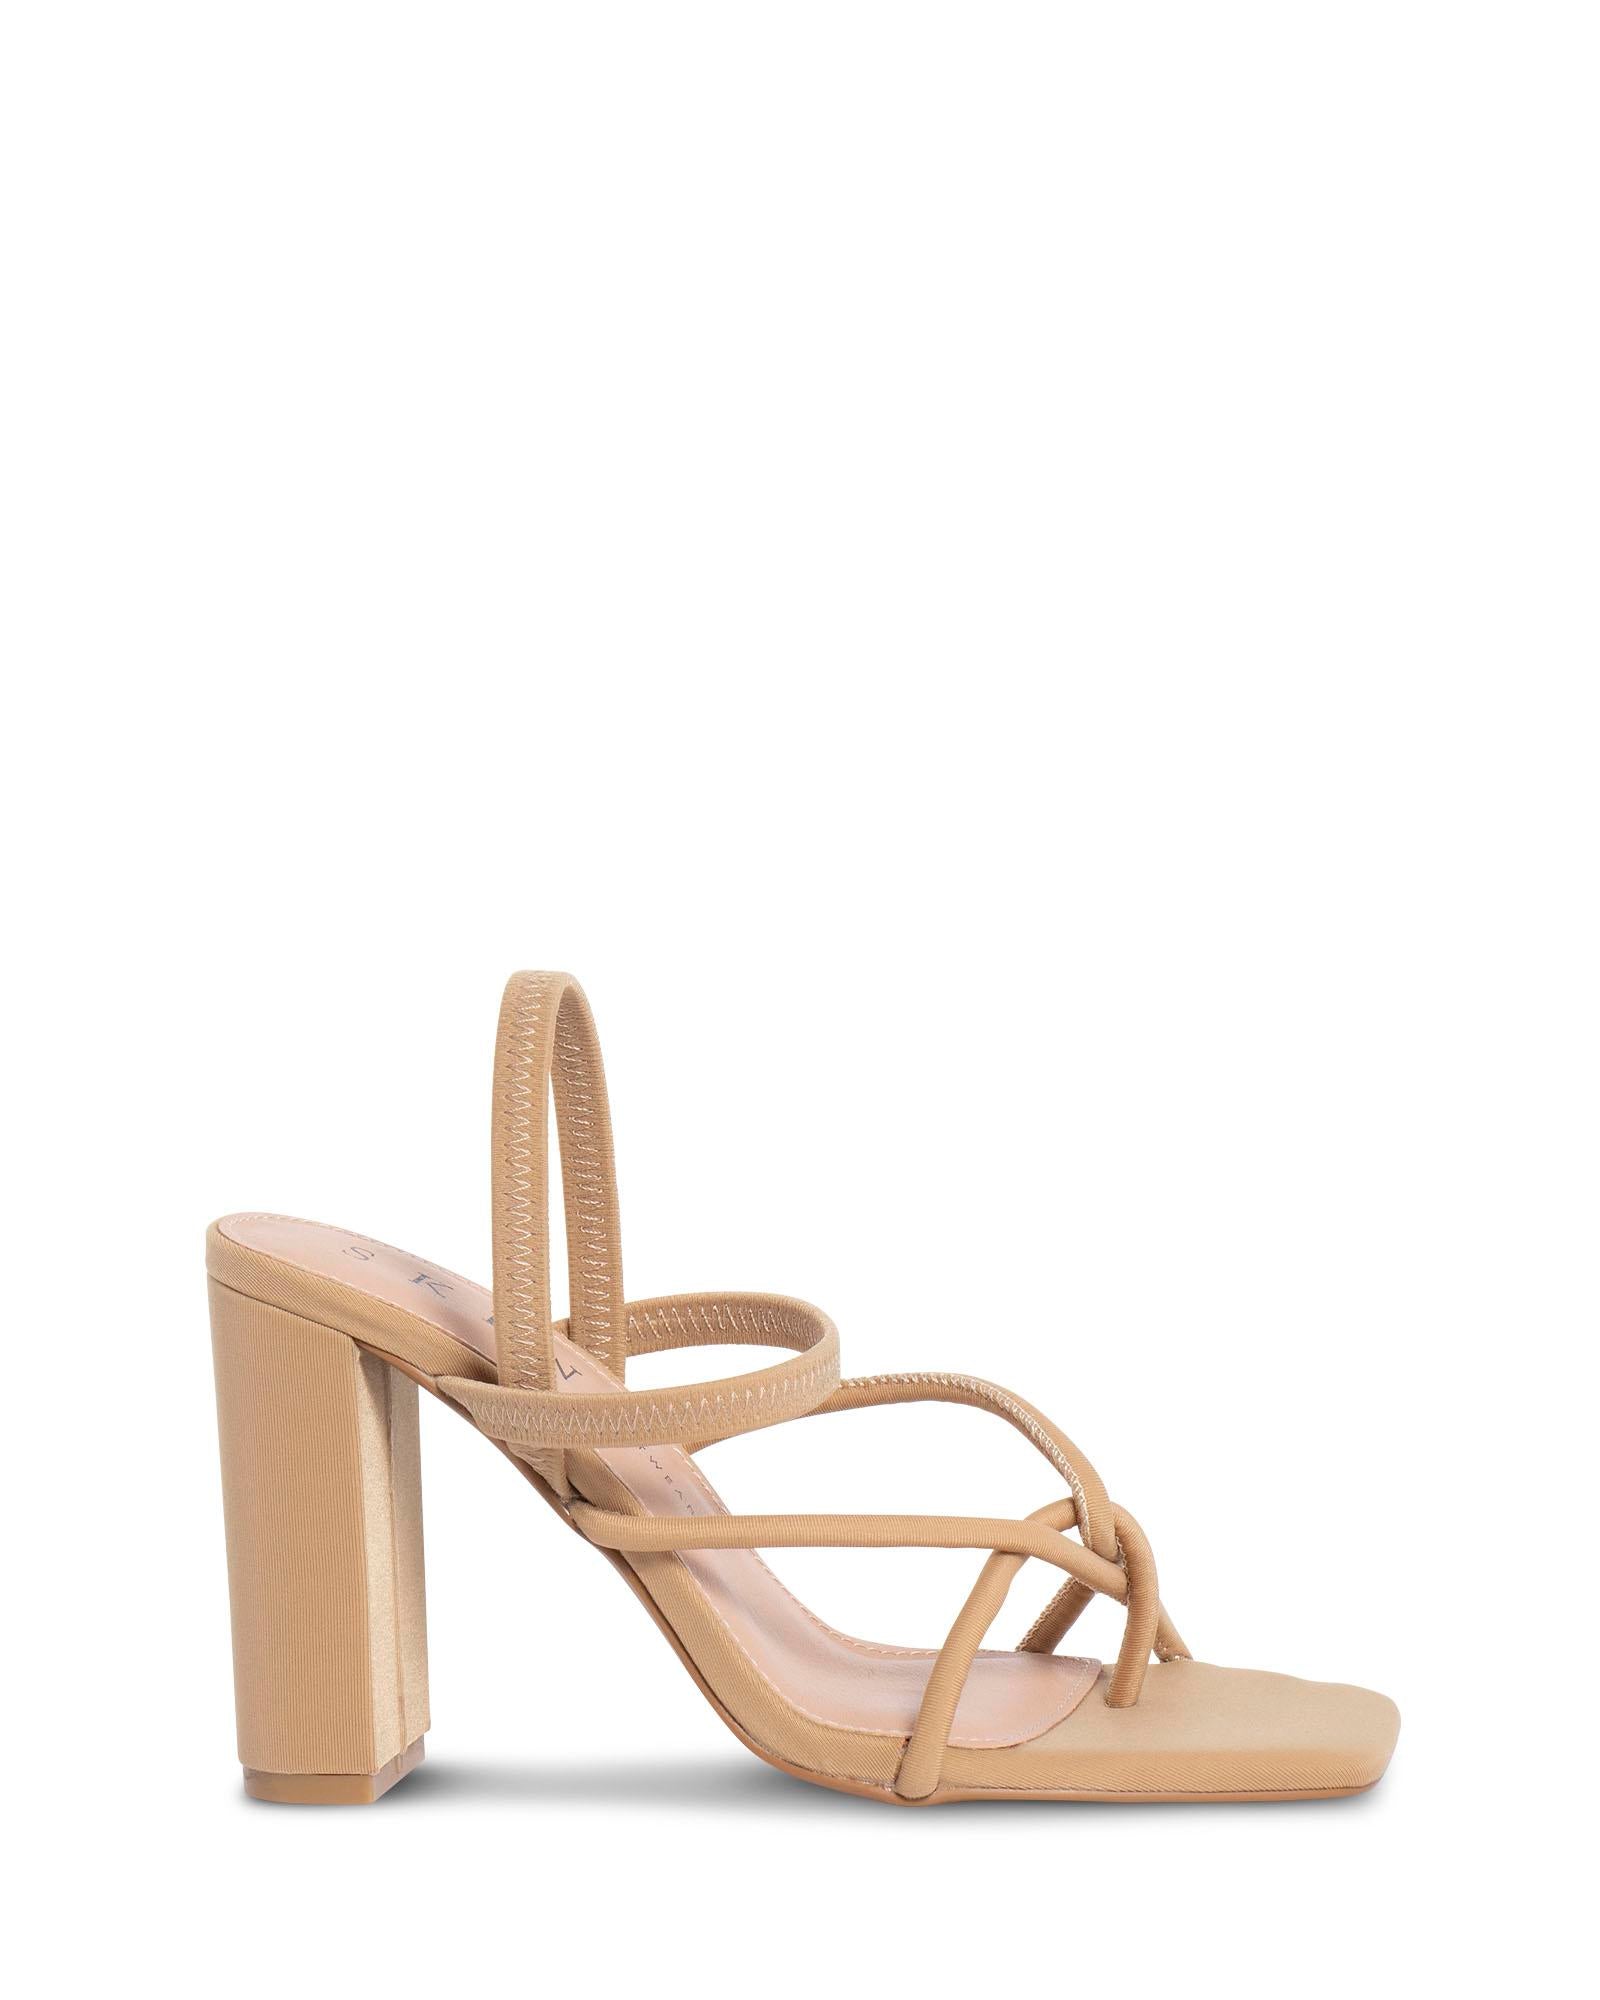 Jersey Nude Strappy 10cm Heel